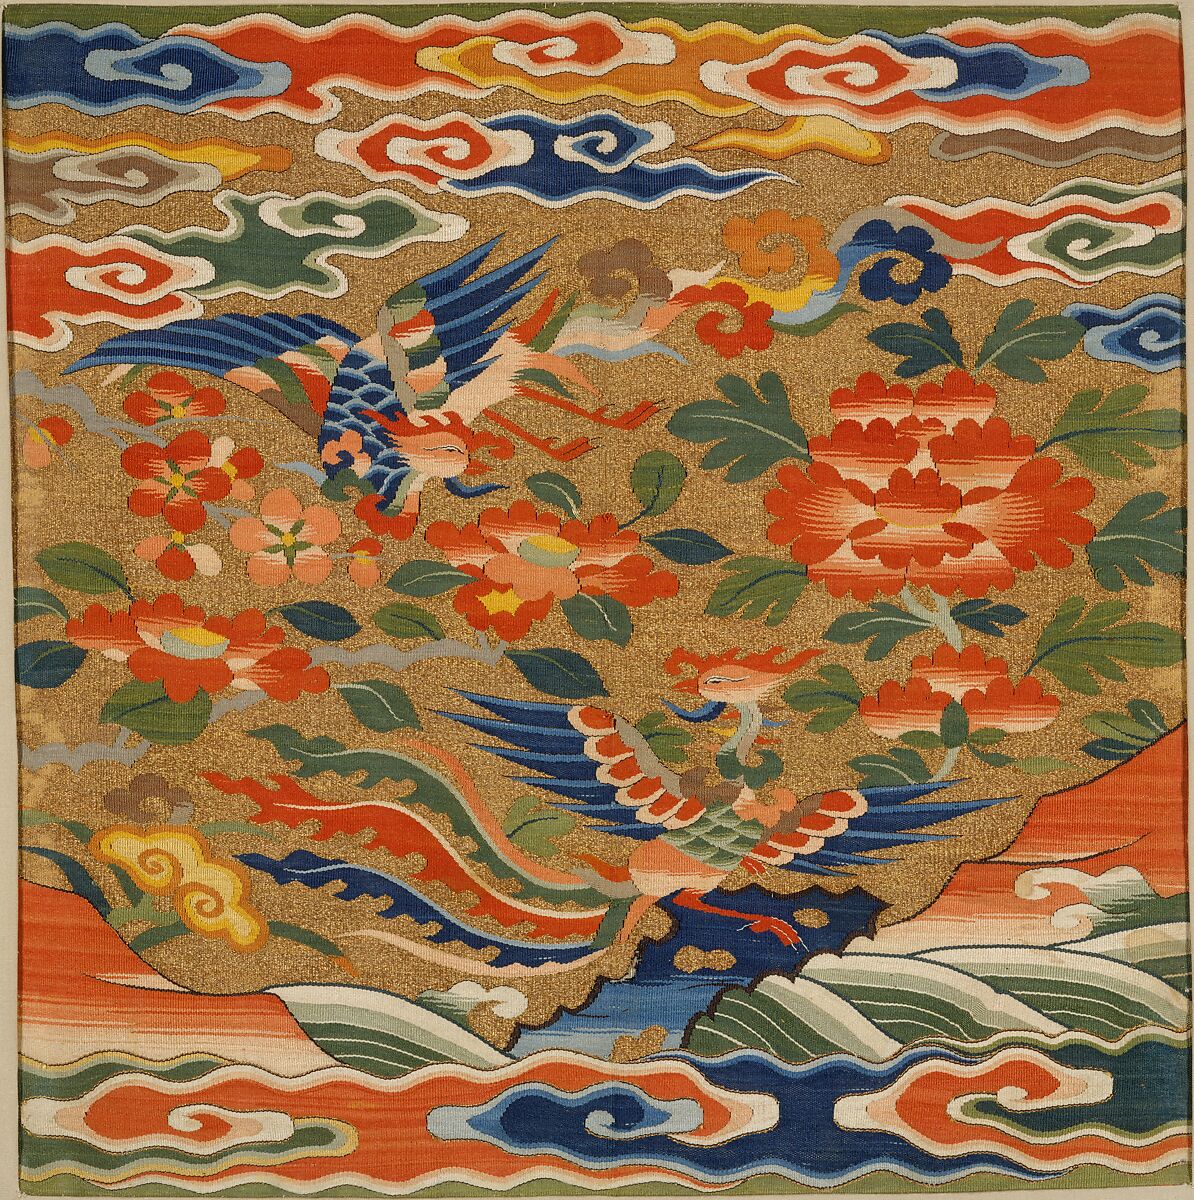 Rank badge with two phoenixes, Silk and metal thread tapestry (kesi), China 